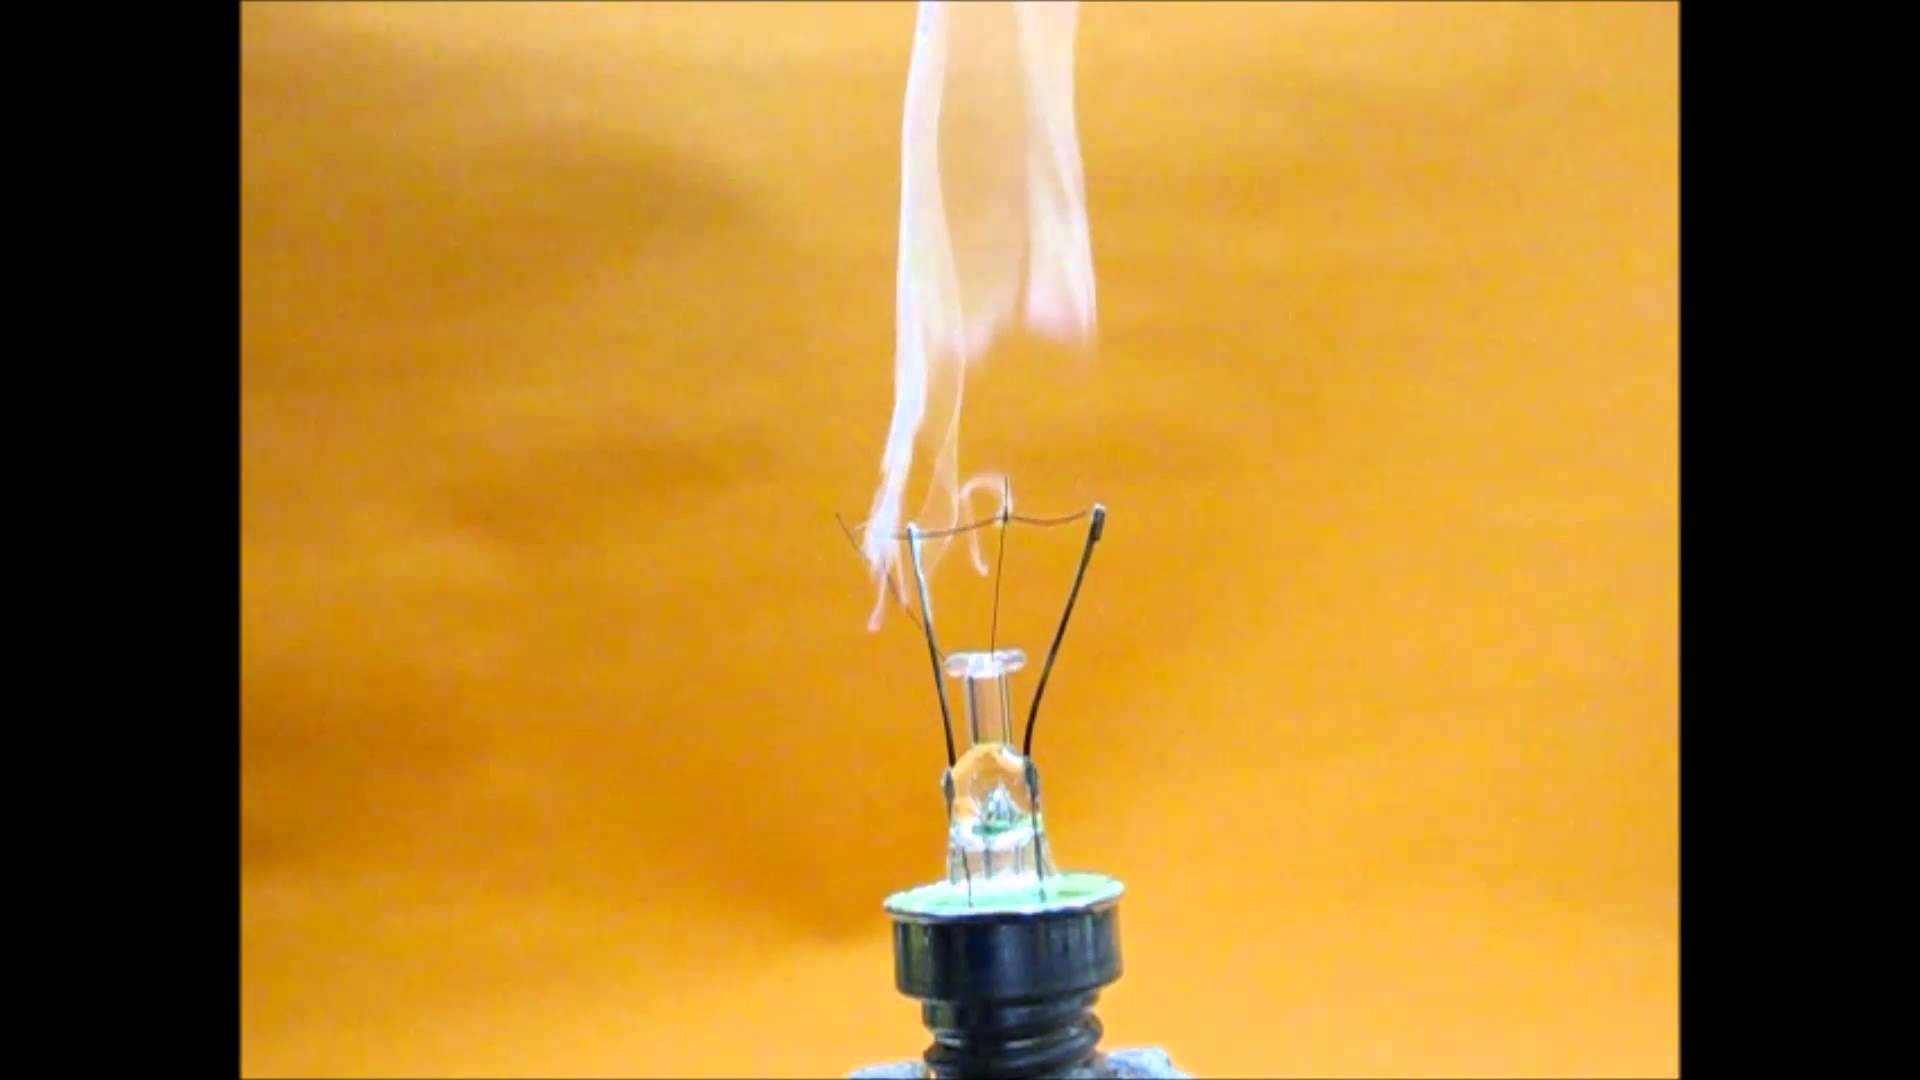 Filament burning out - slow motion. - YouTube